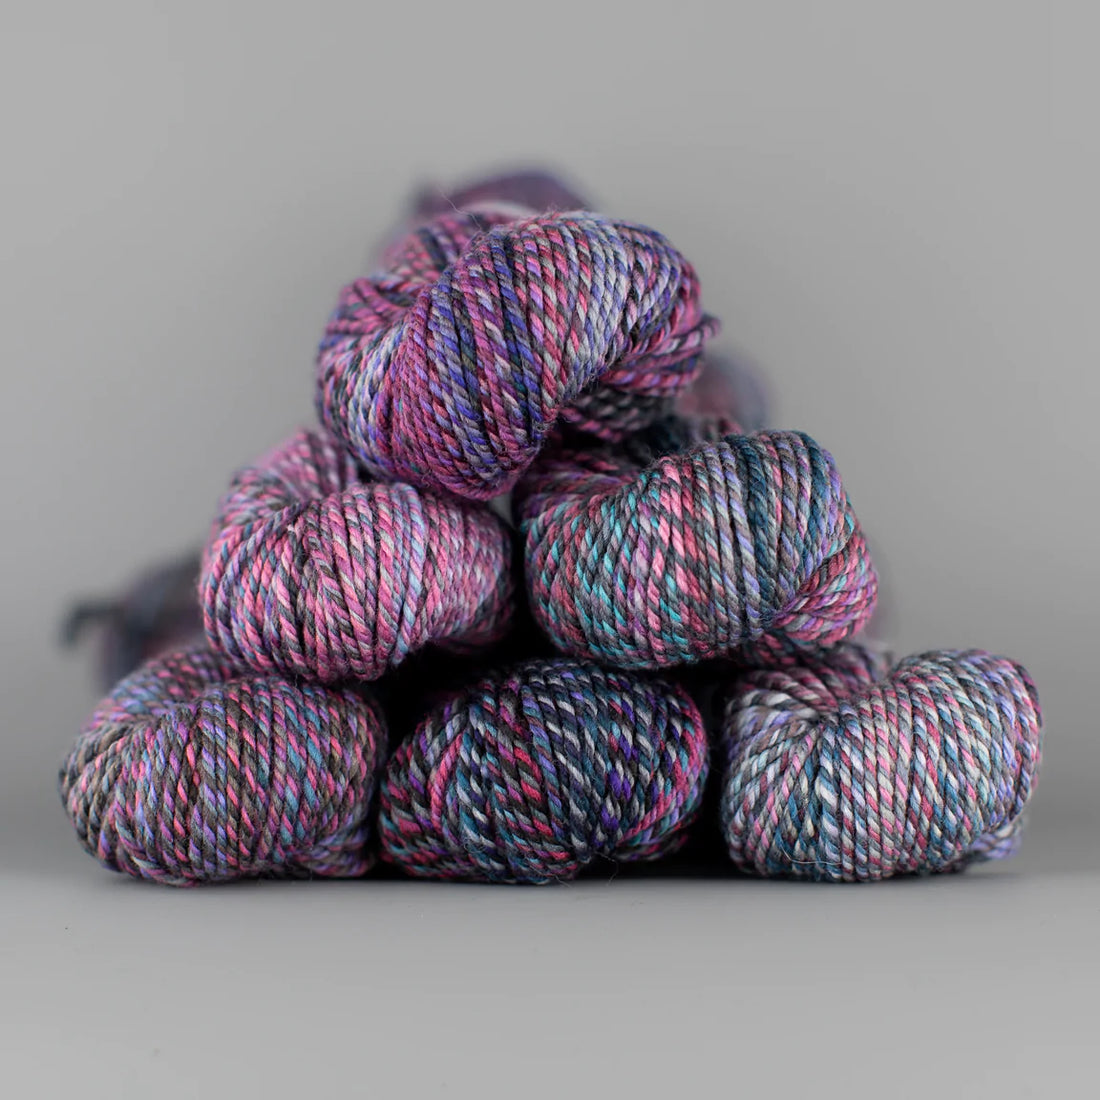 Spincycle Yarns Dream State